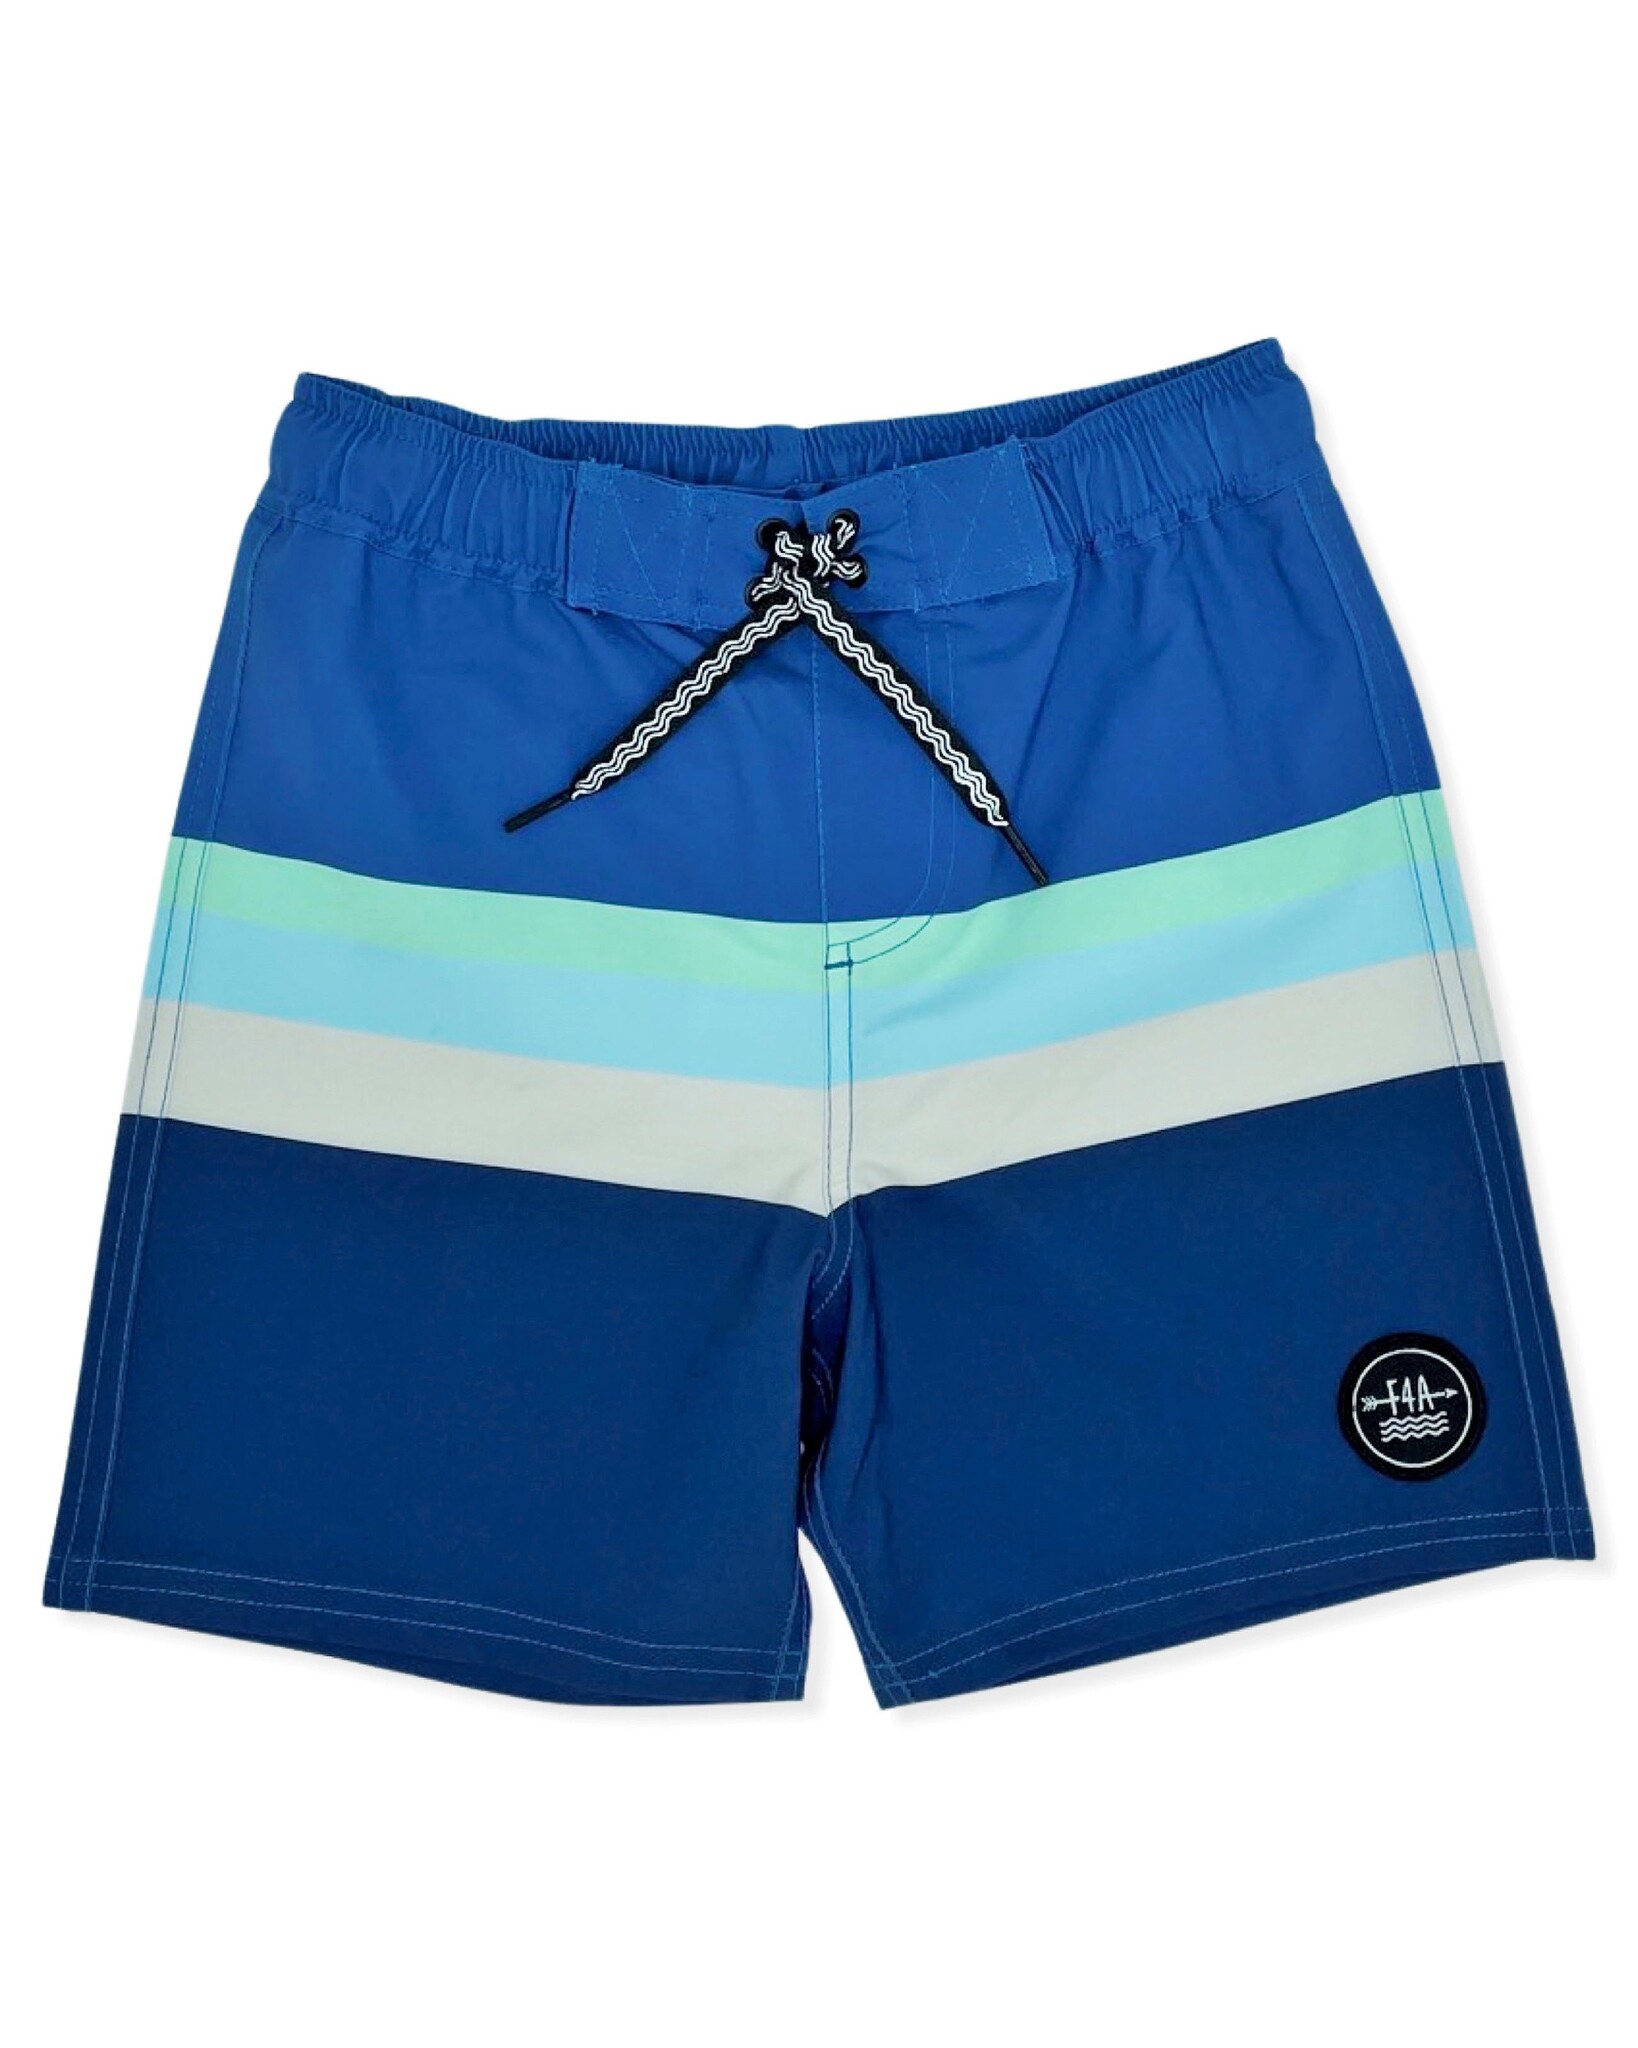 Feather 4 Arrow - Kids Yellow - Turtle Boardshort - Voyager NVY